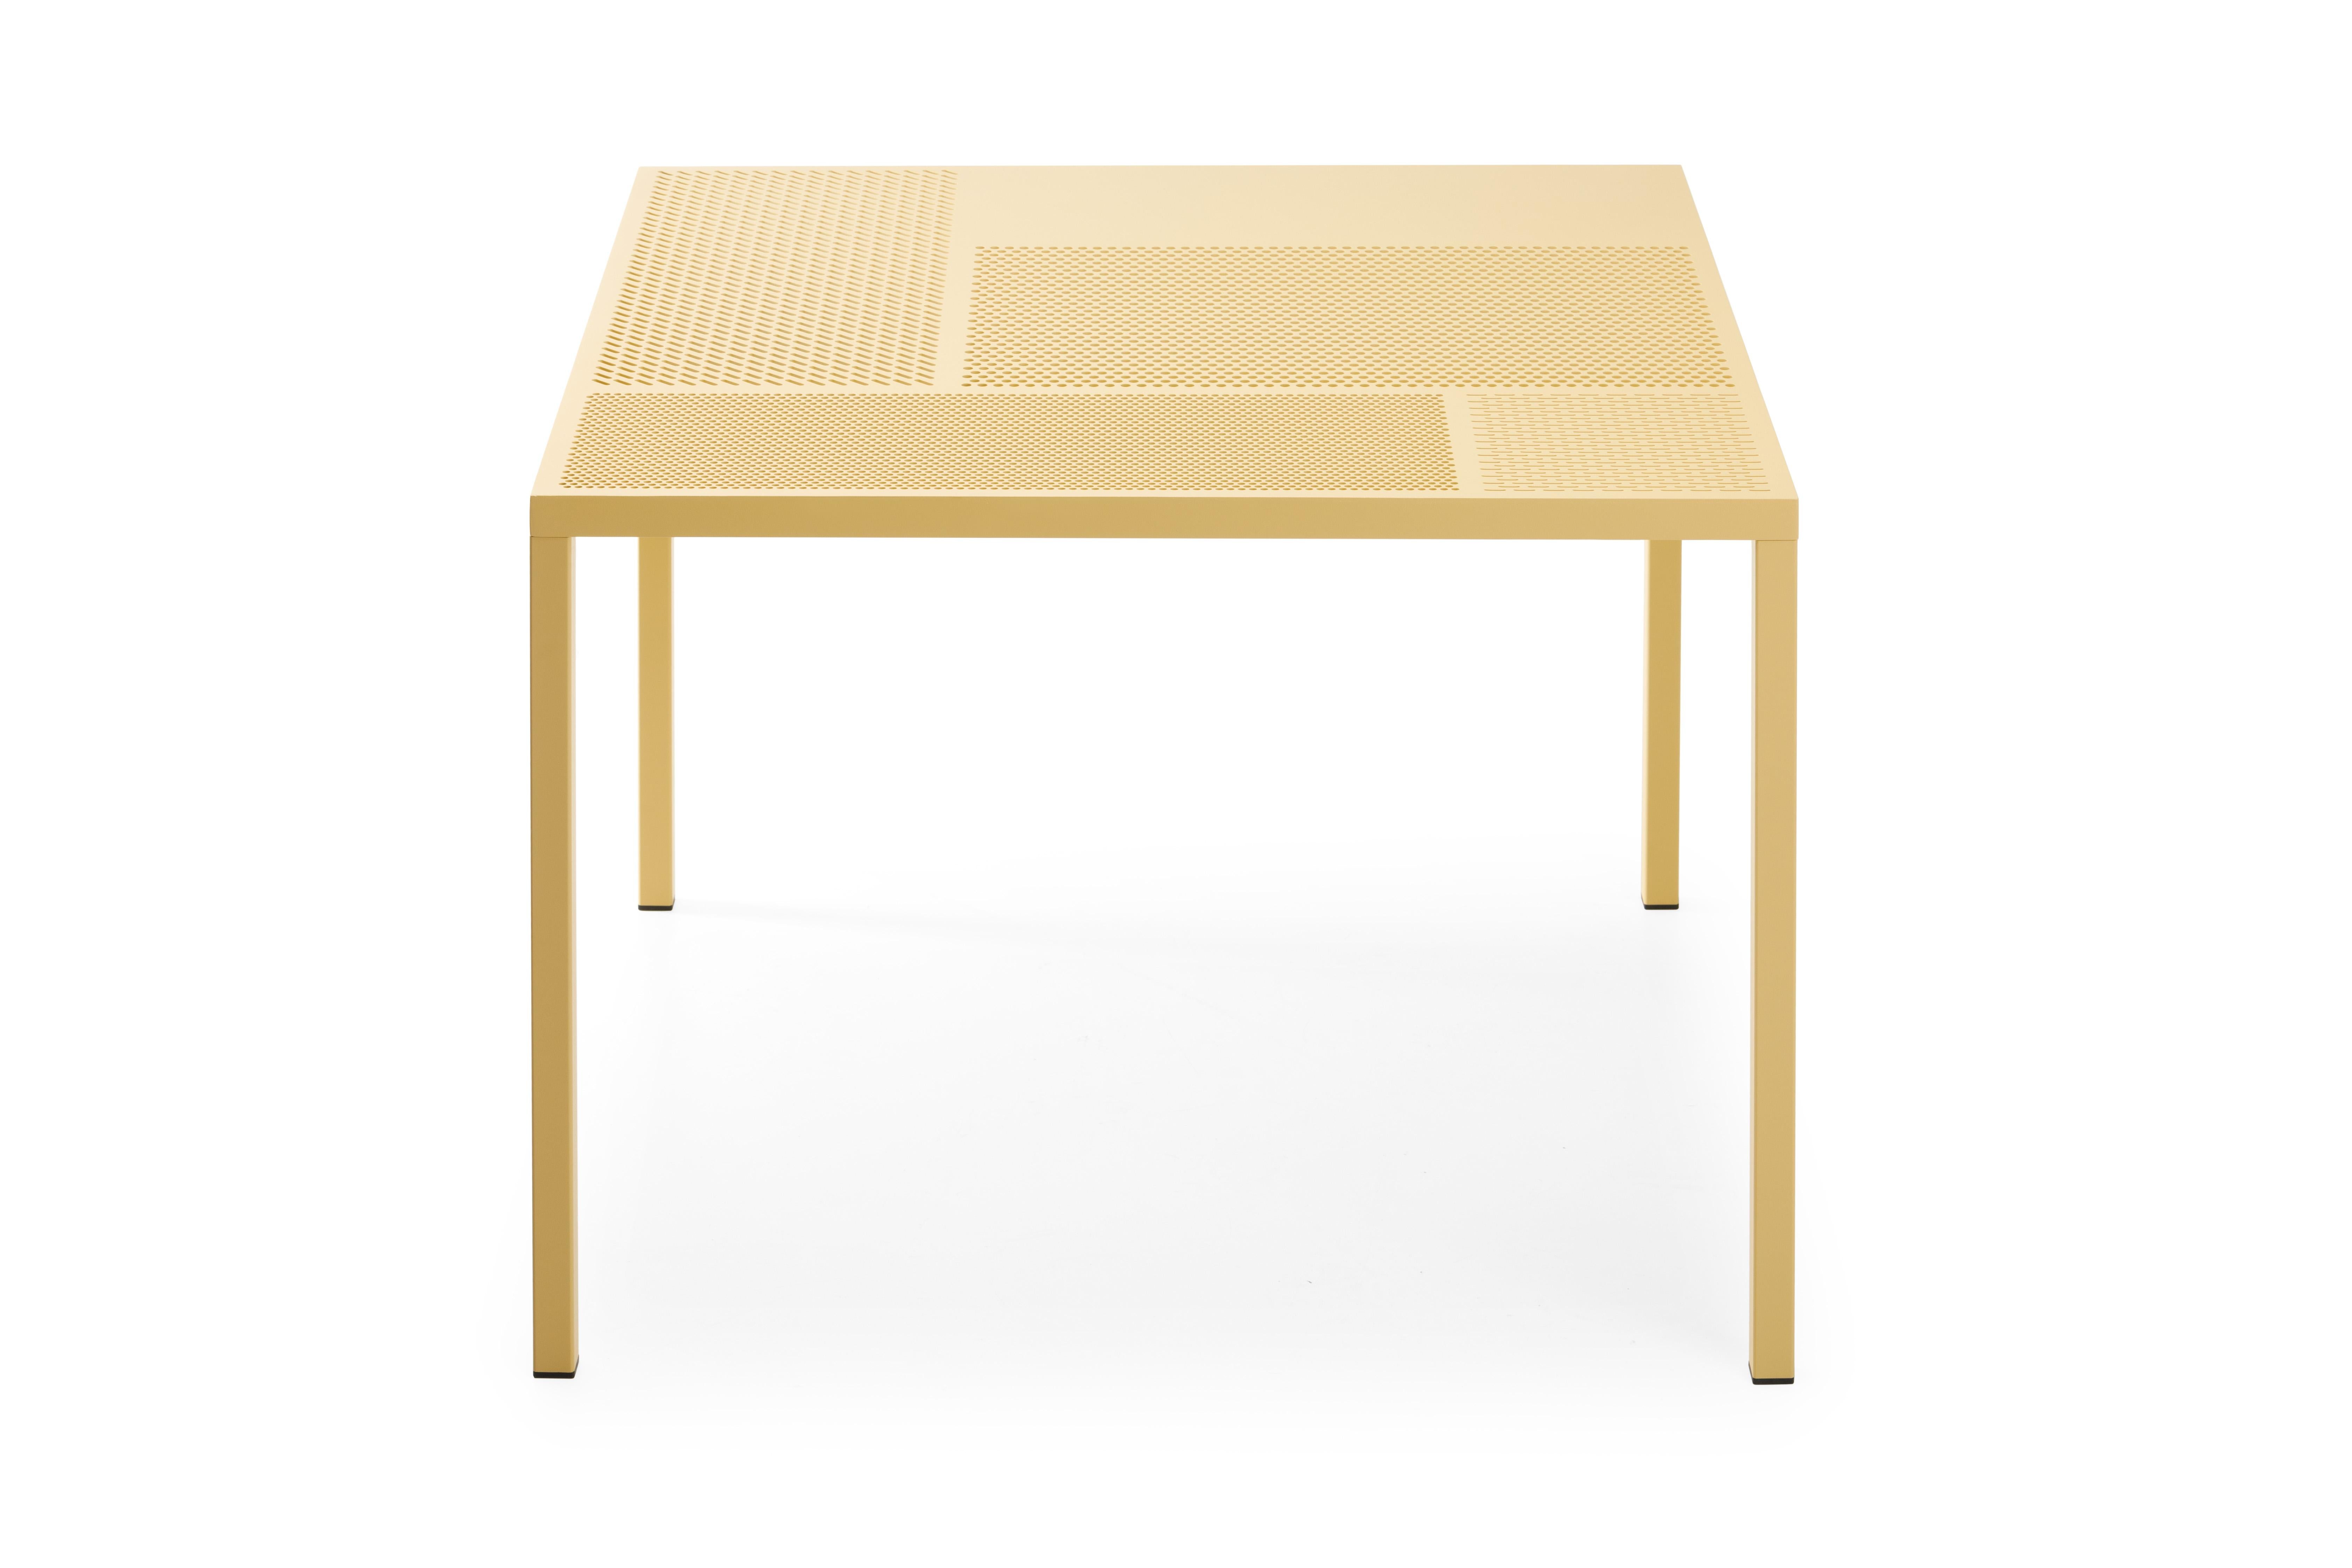 Italian 21st Century Modern Perforated Steel Sheet Table for Outdoor Neo Made in Italy For Sale